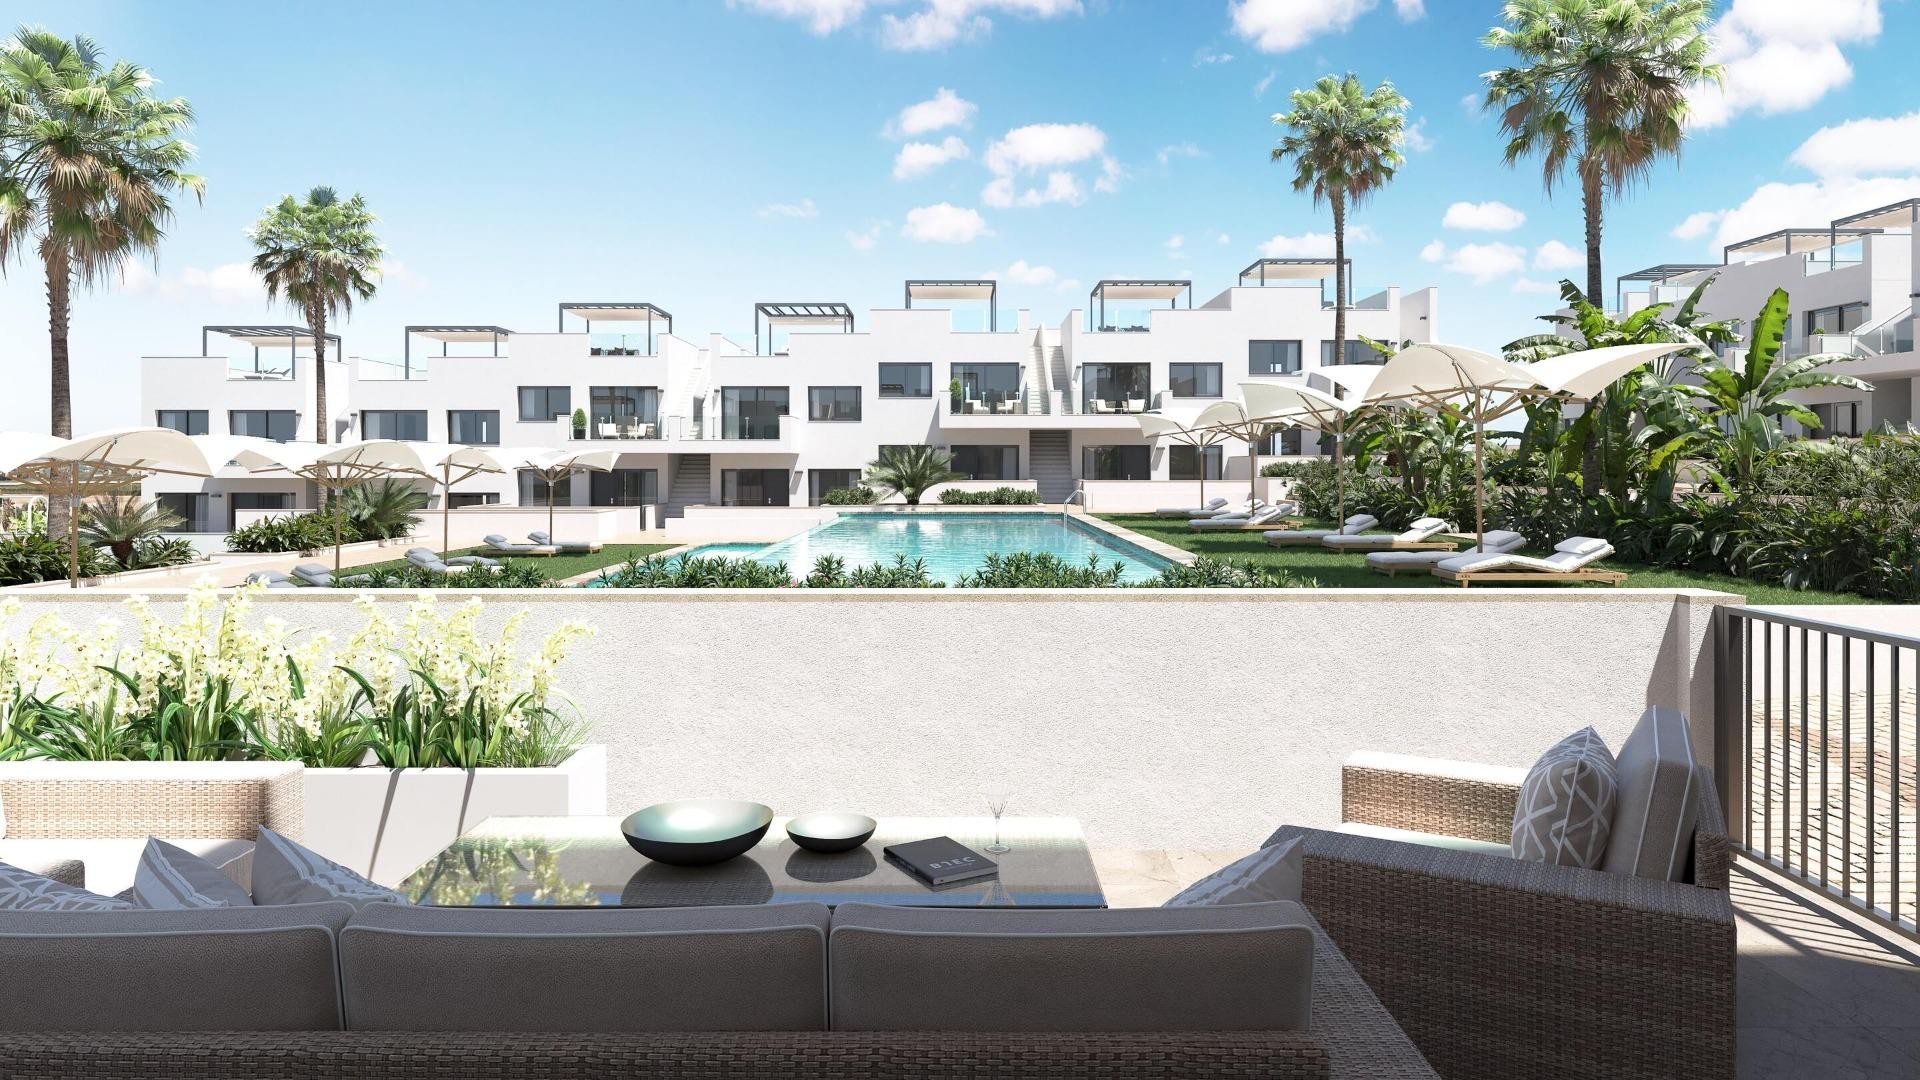 Brand new bungalow apartments in Los Balcones, Torrevieja, 2/3 bedrooms, 2 bathrooms, great pool area with garden, spectacular views over pink lagoon